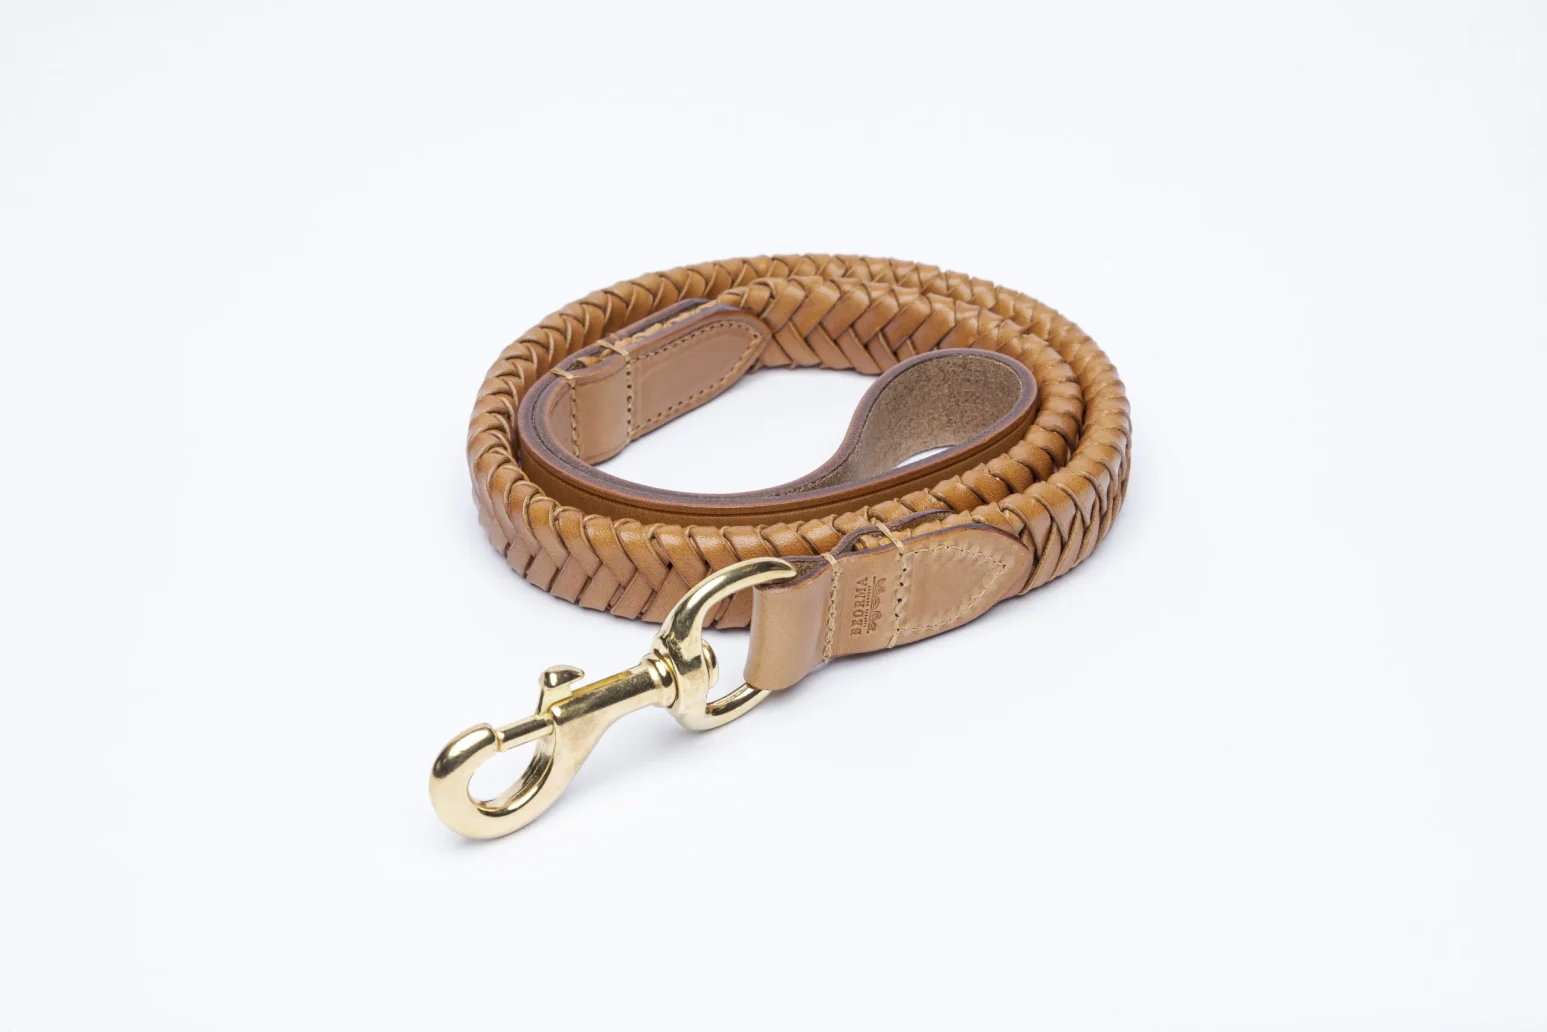 Plaited Dog Lead in Vegetable Tan Leather in Tan coiled